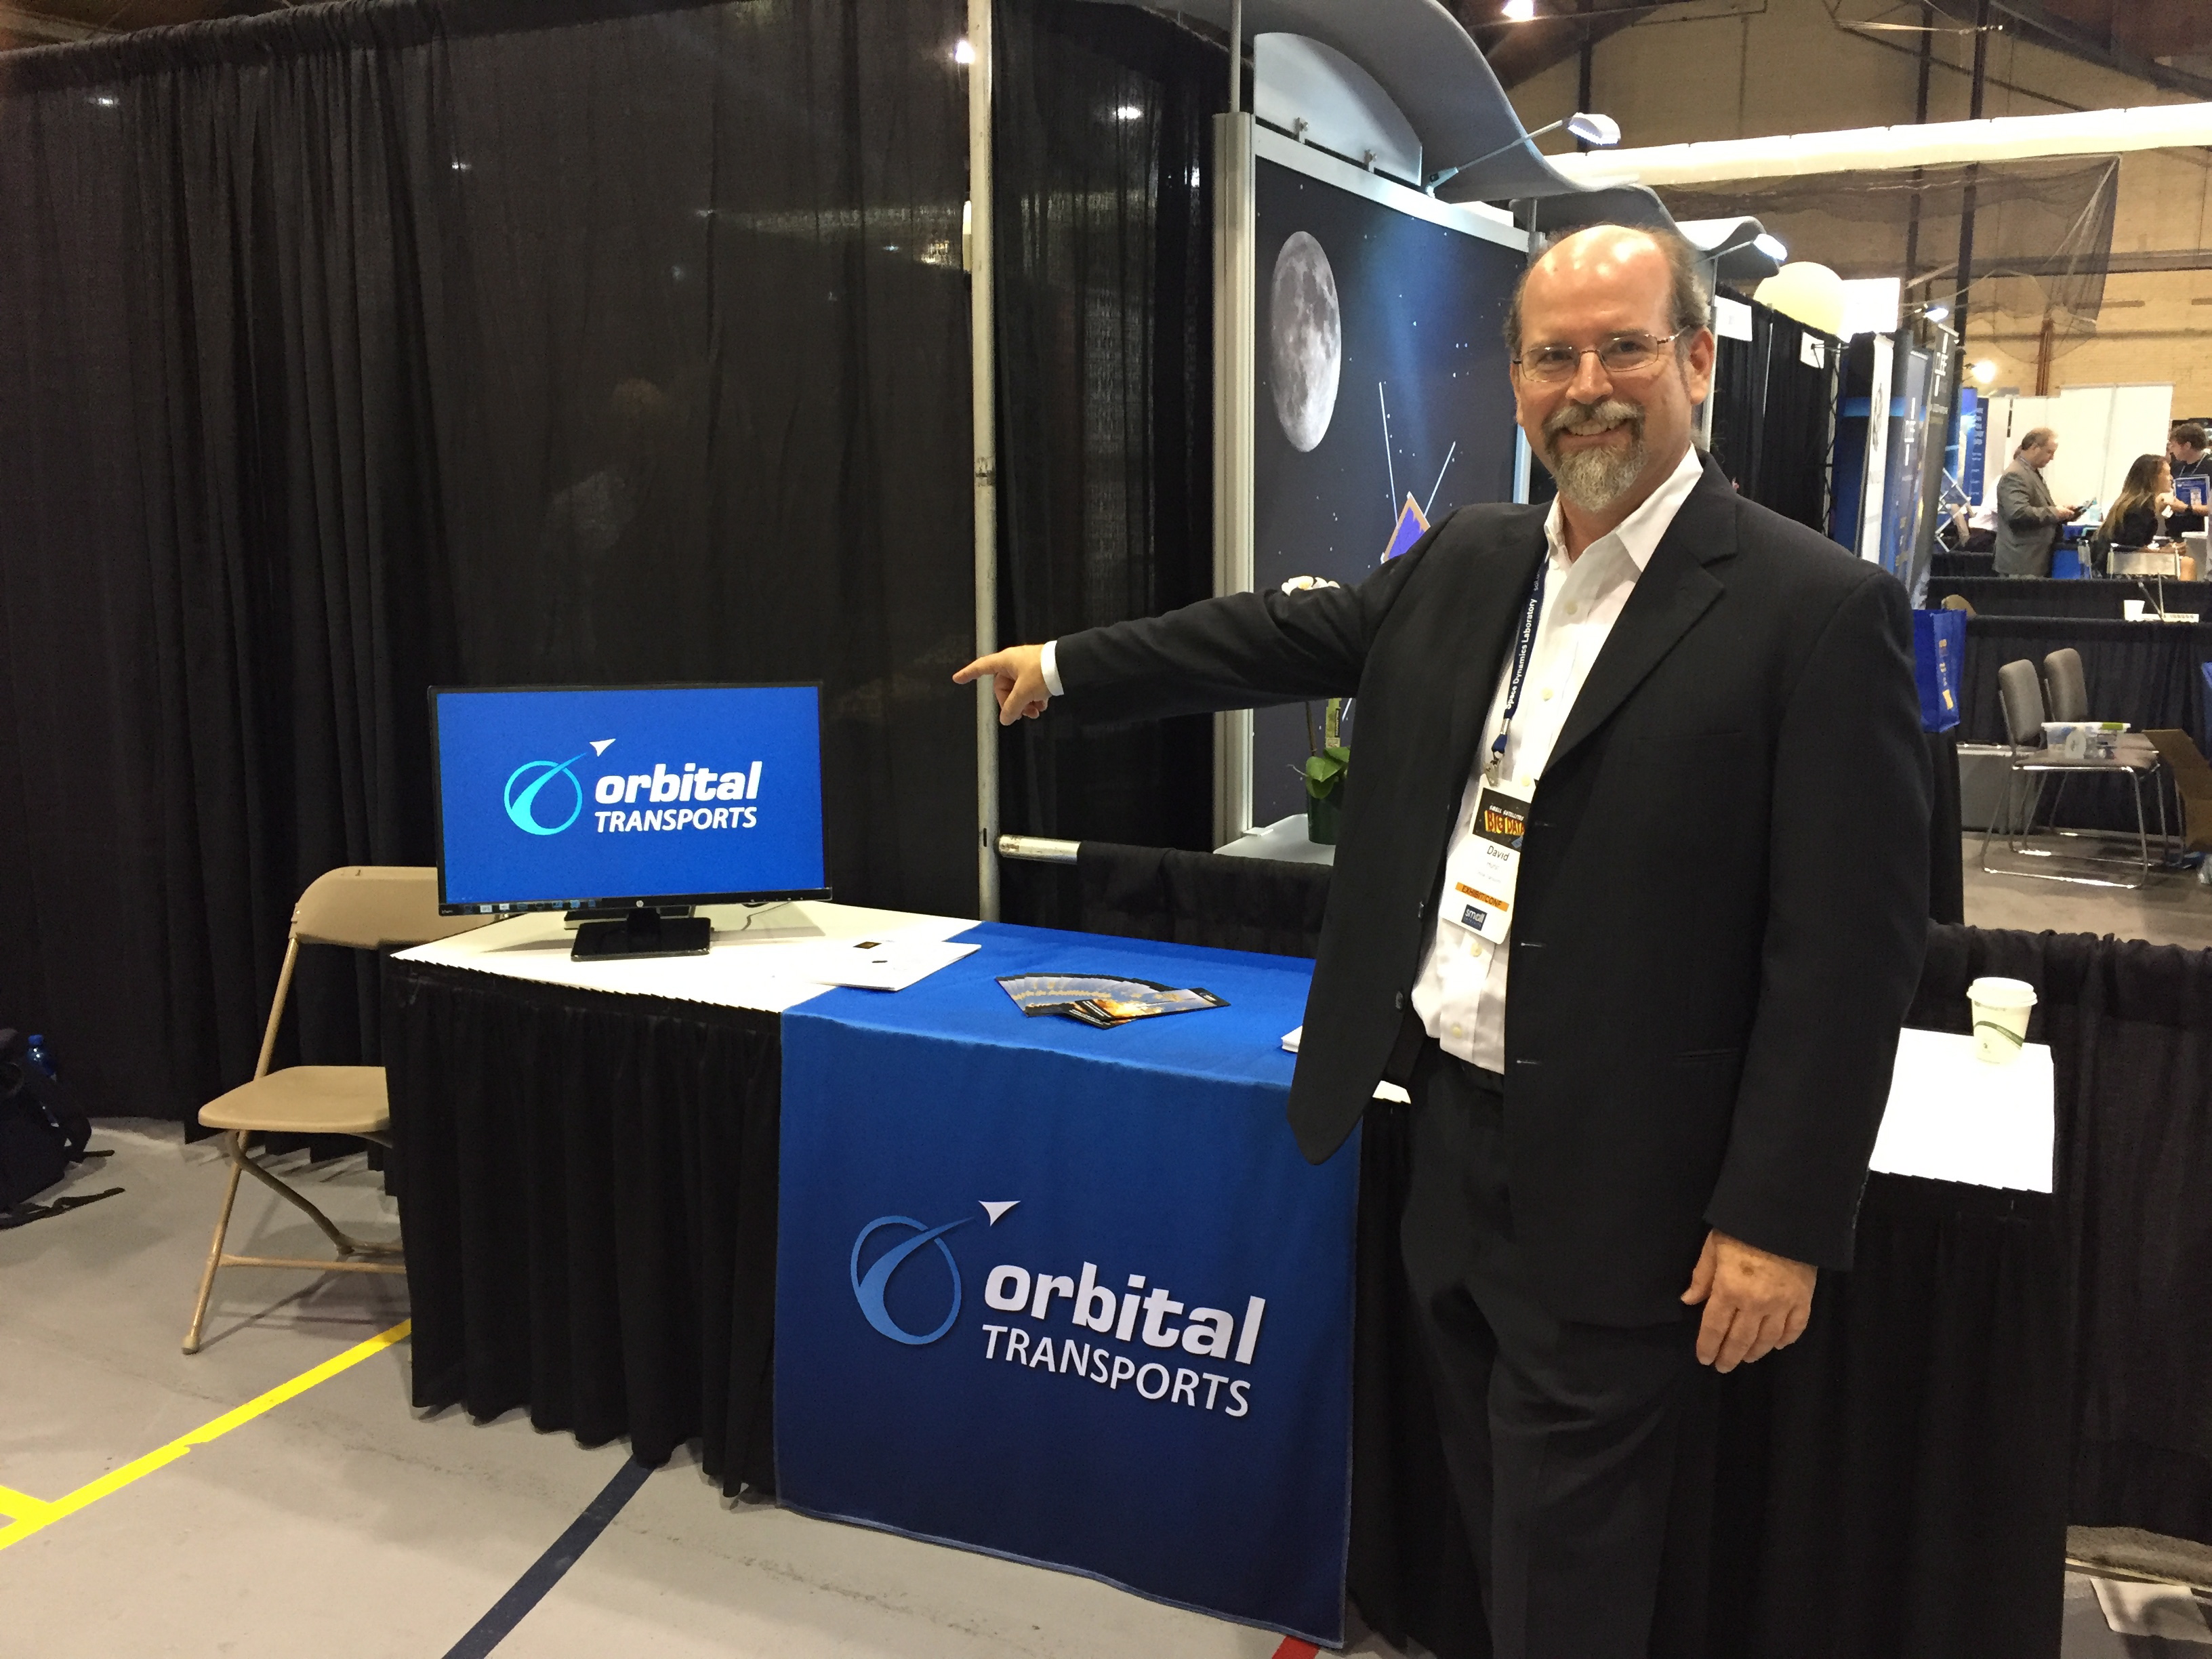 David Hurst, founder and CEO of Orbital Transports at SmallSat Conference in Utah